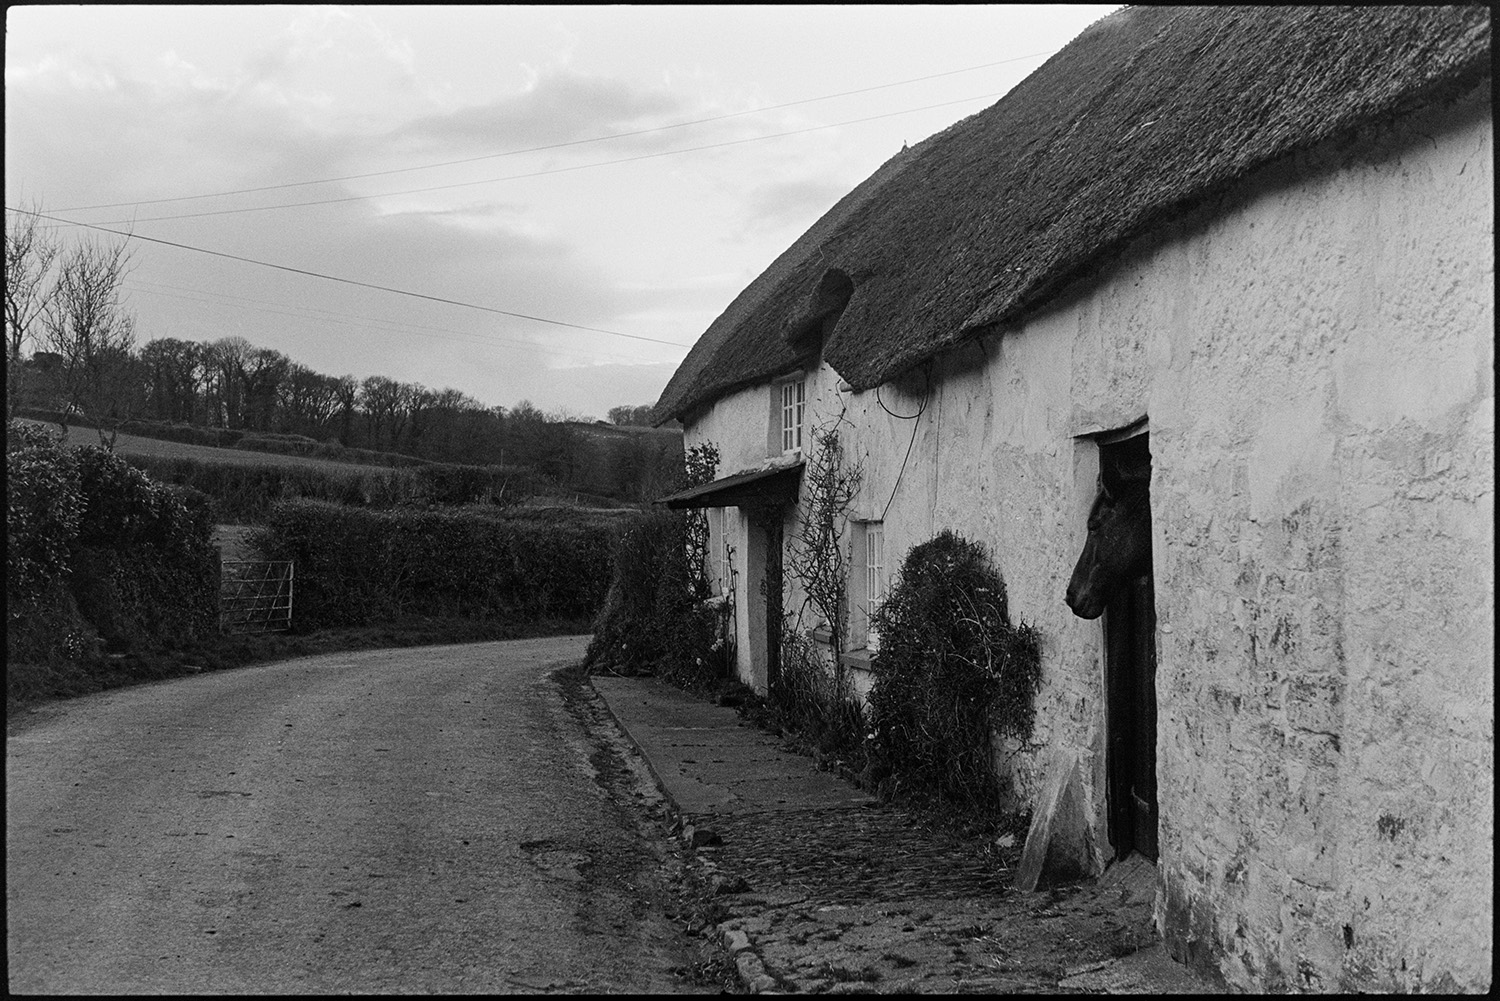 Thatch and cob Devon longhouse.
[Cob and thatched longhouse at Rashleigh Mill, Ashreigney. A horse is looking outs of a stable doorway in the house to the road outside.]